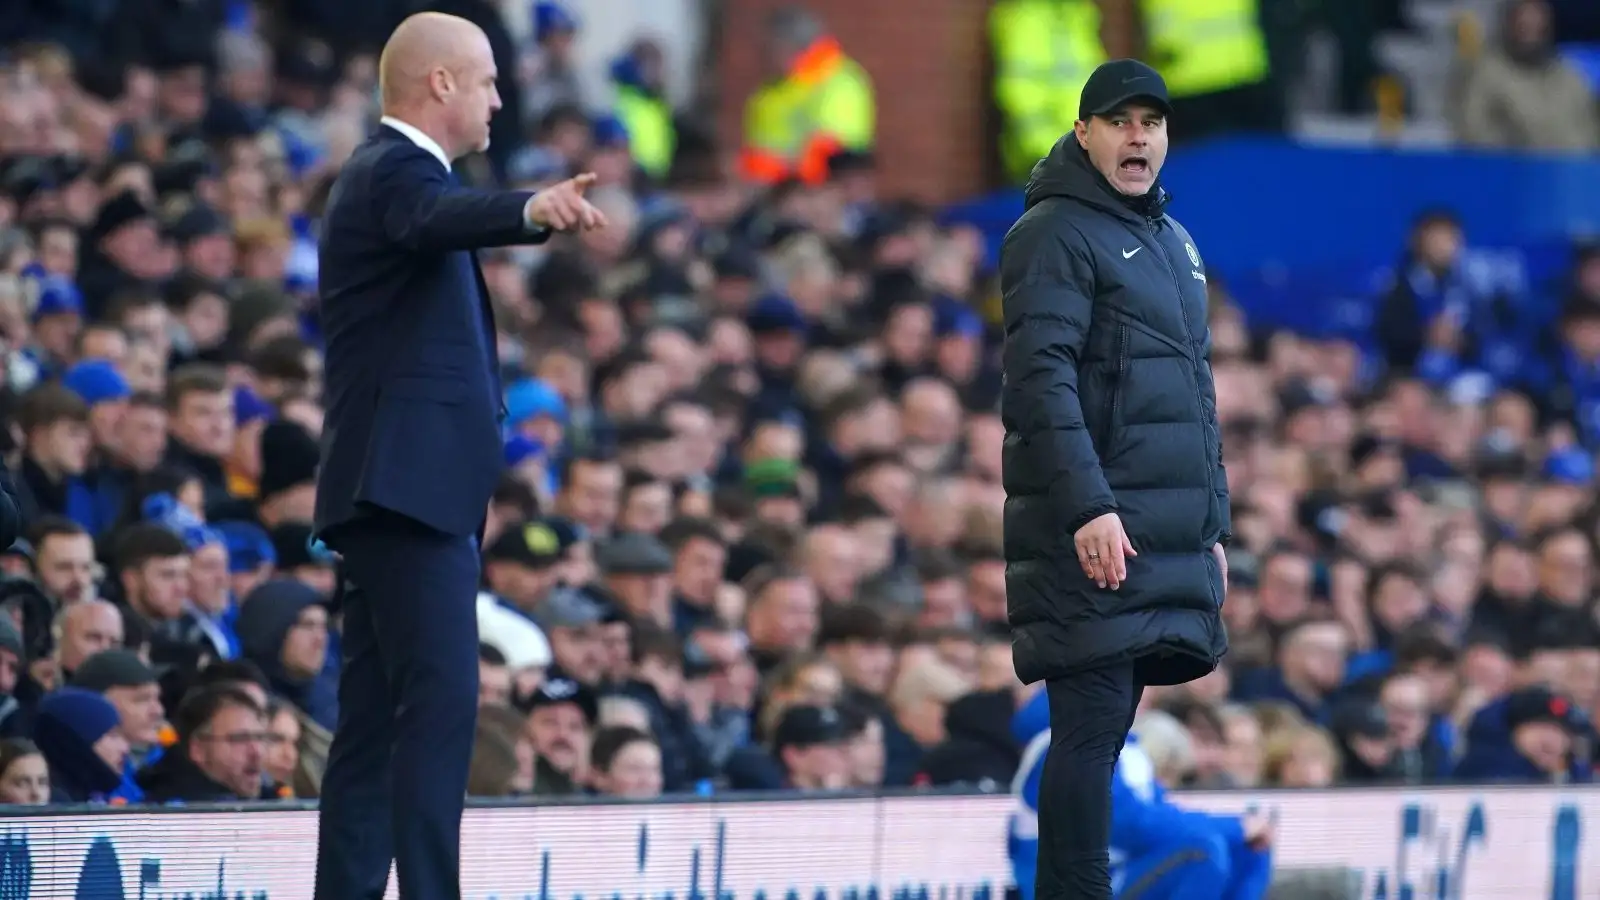 Chelsea boss Mauricio Pochettino and Everton manager Sean Dyche on the touchline during a match.